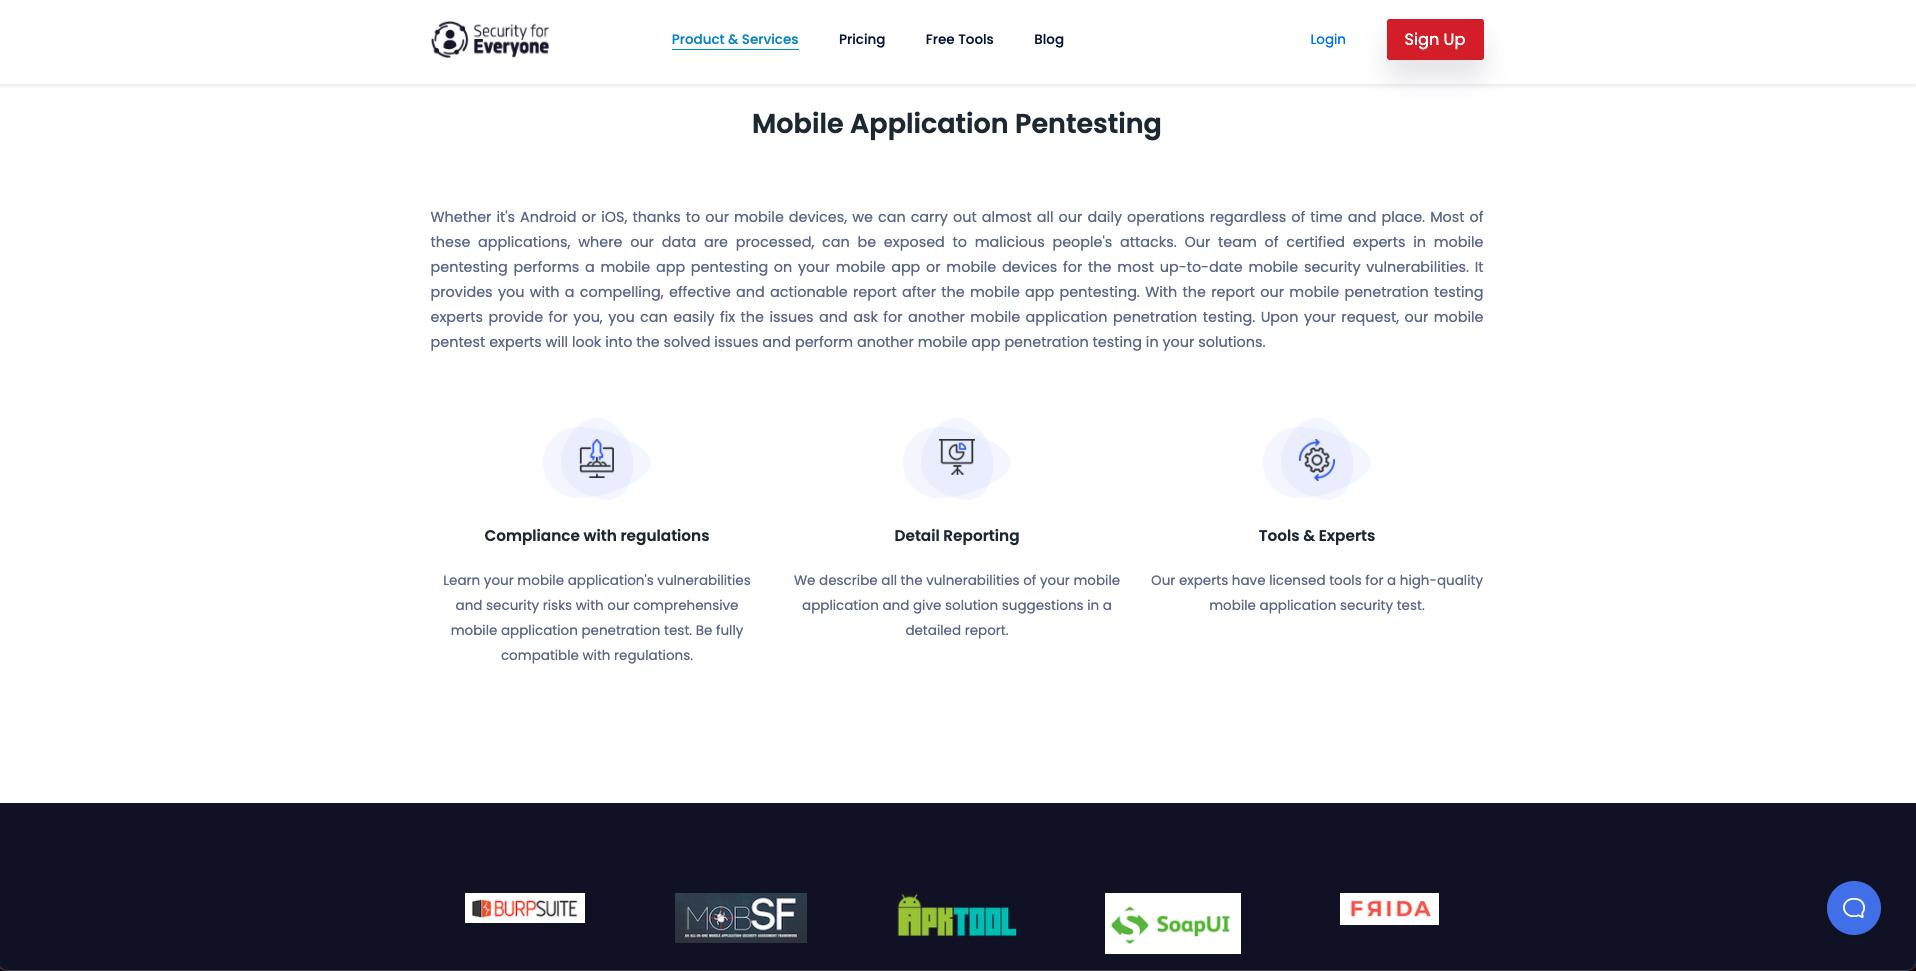 Mobile Application Penetration Testing-Security for Everyone